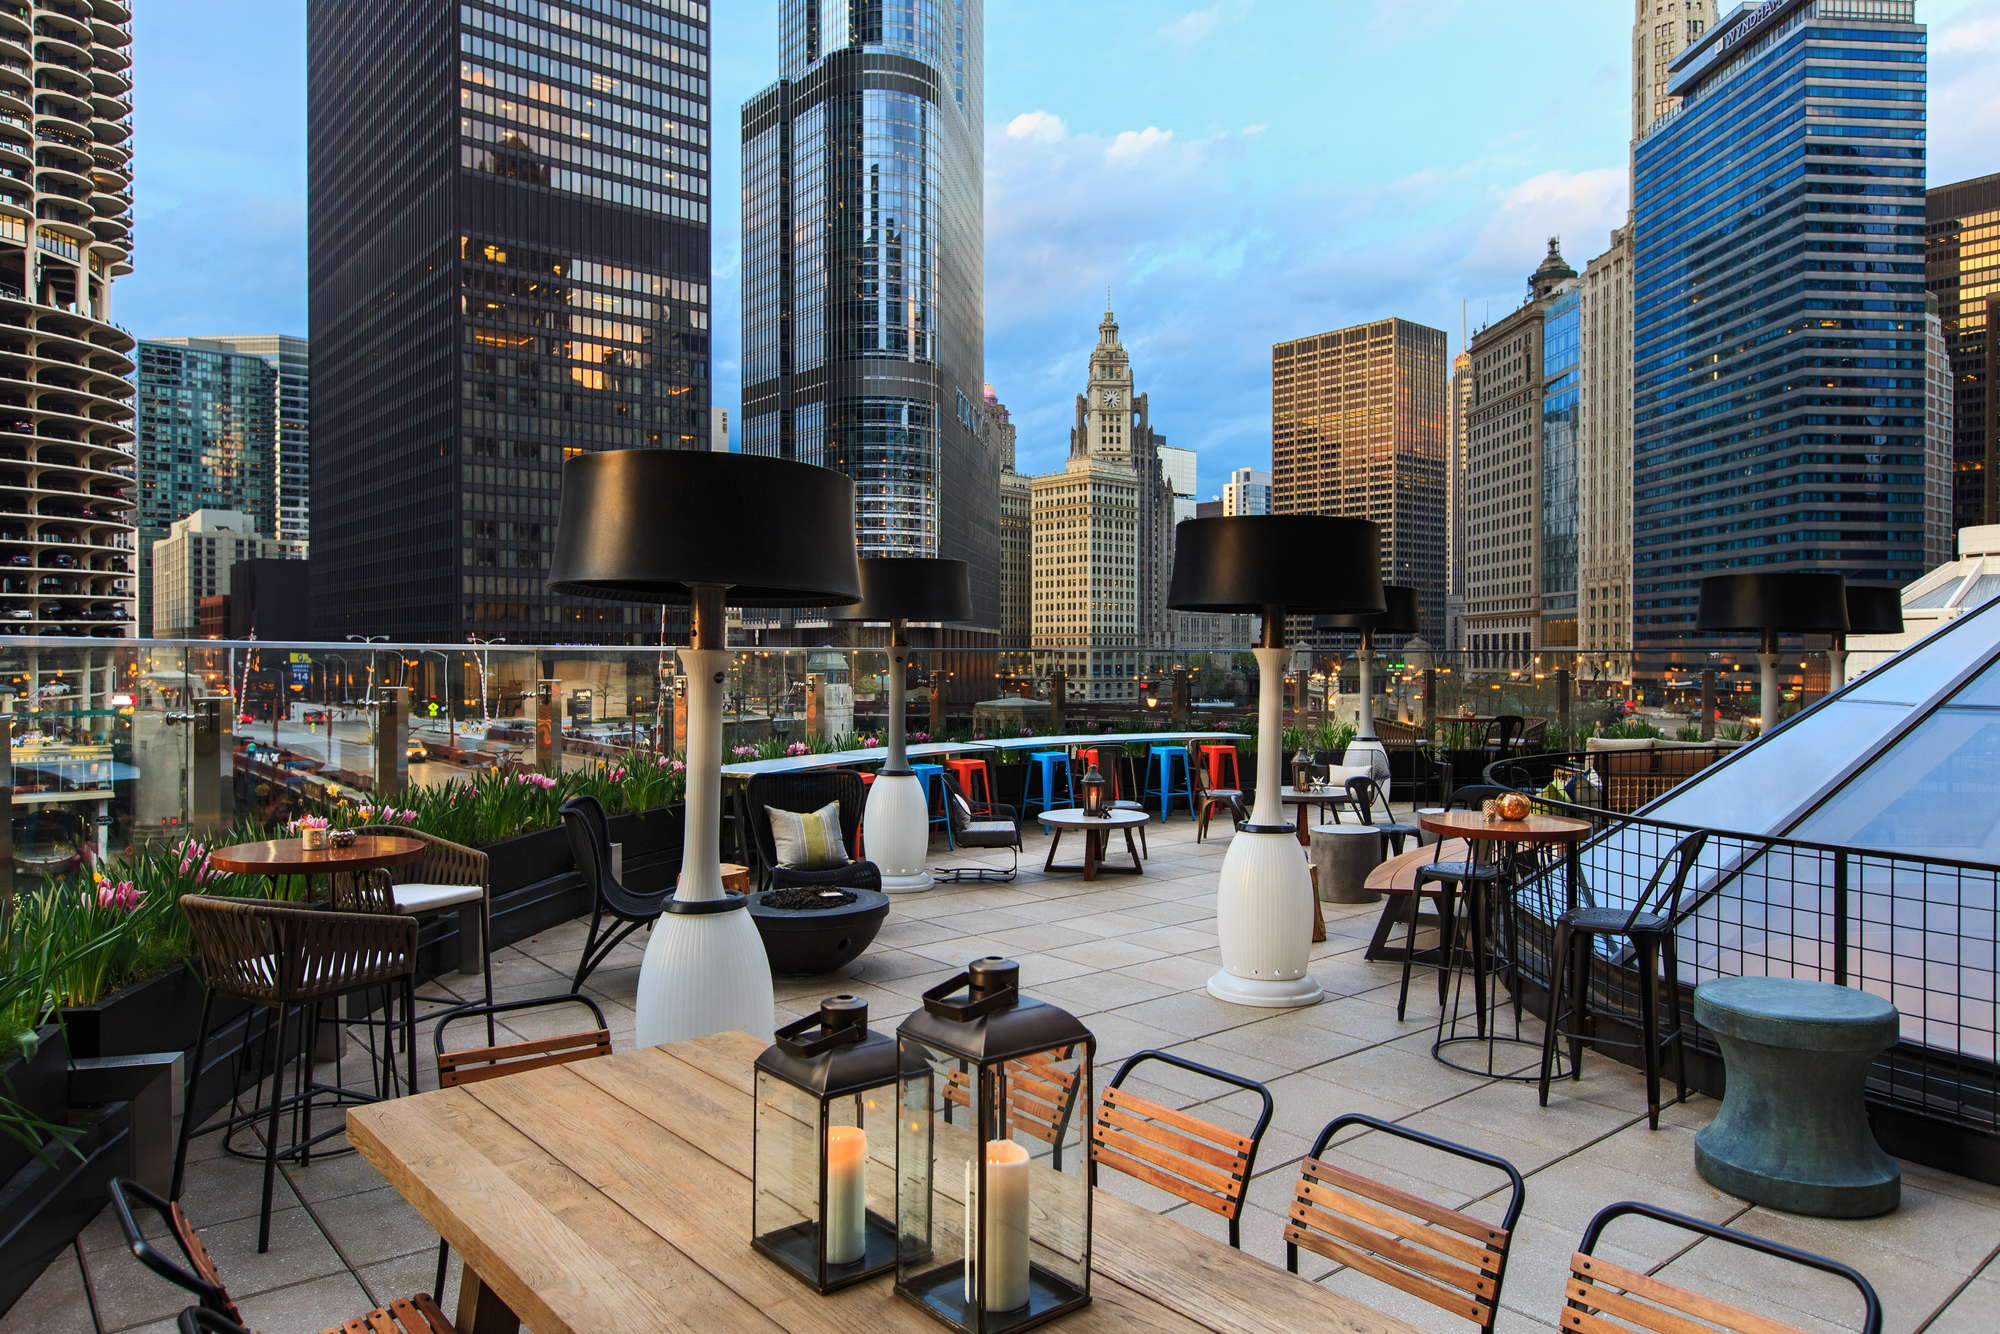 Renaissance Chicago Downtown Hotel Expert Review Fodor’s Travel